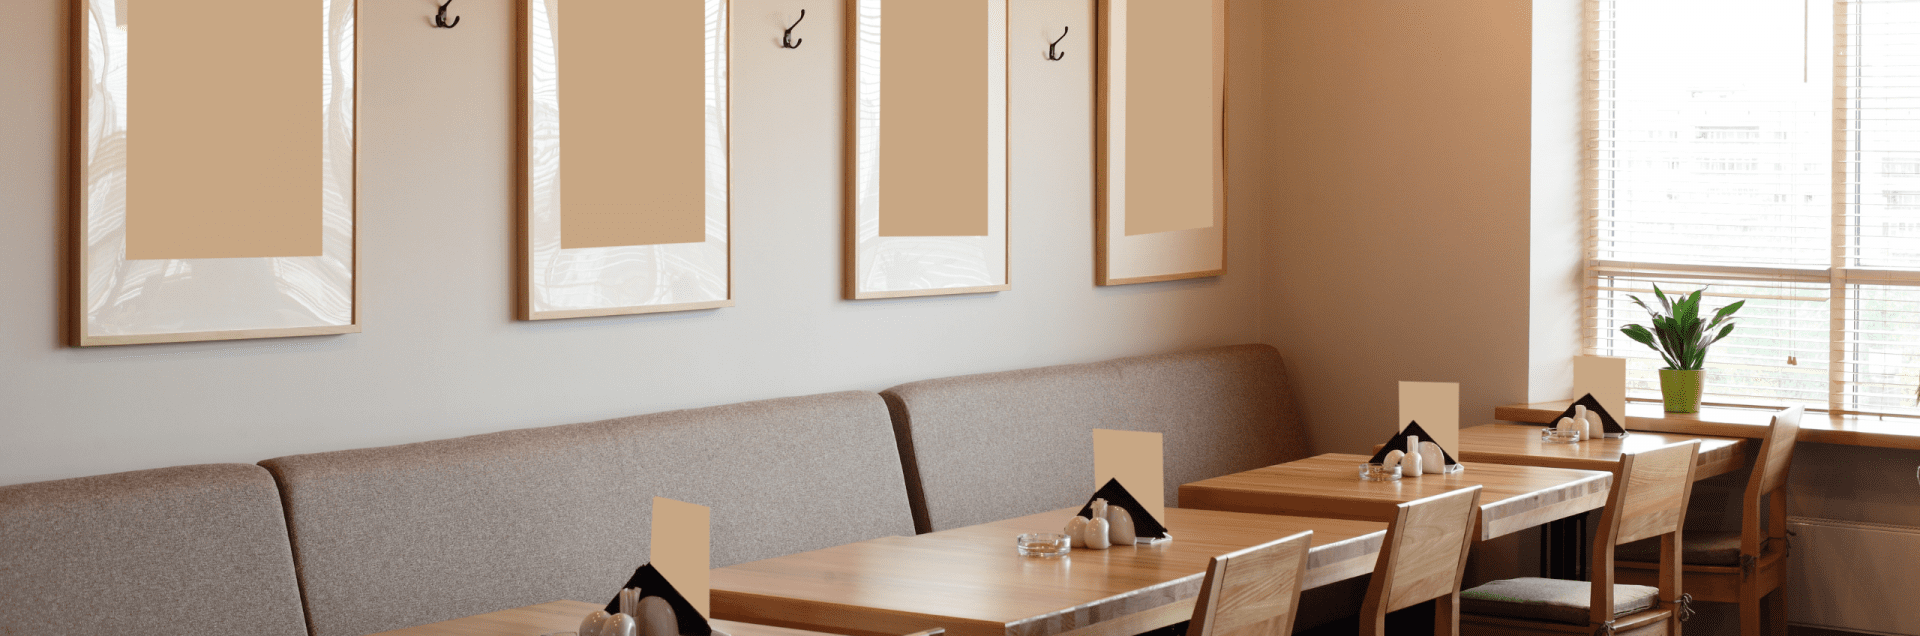 Painting Restaurant in Florida: All You Need to Know | CertaPro